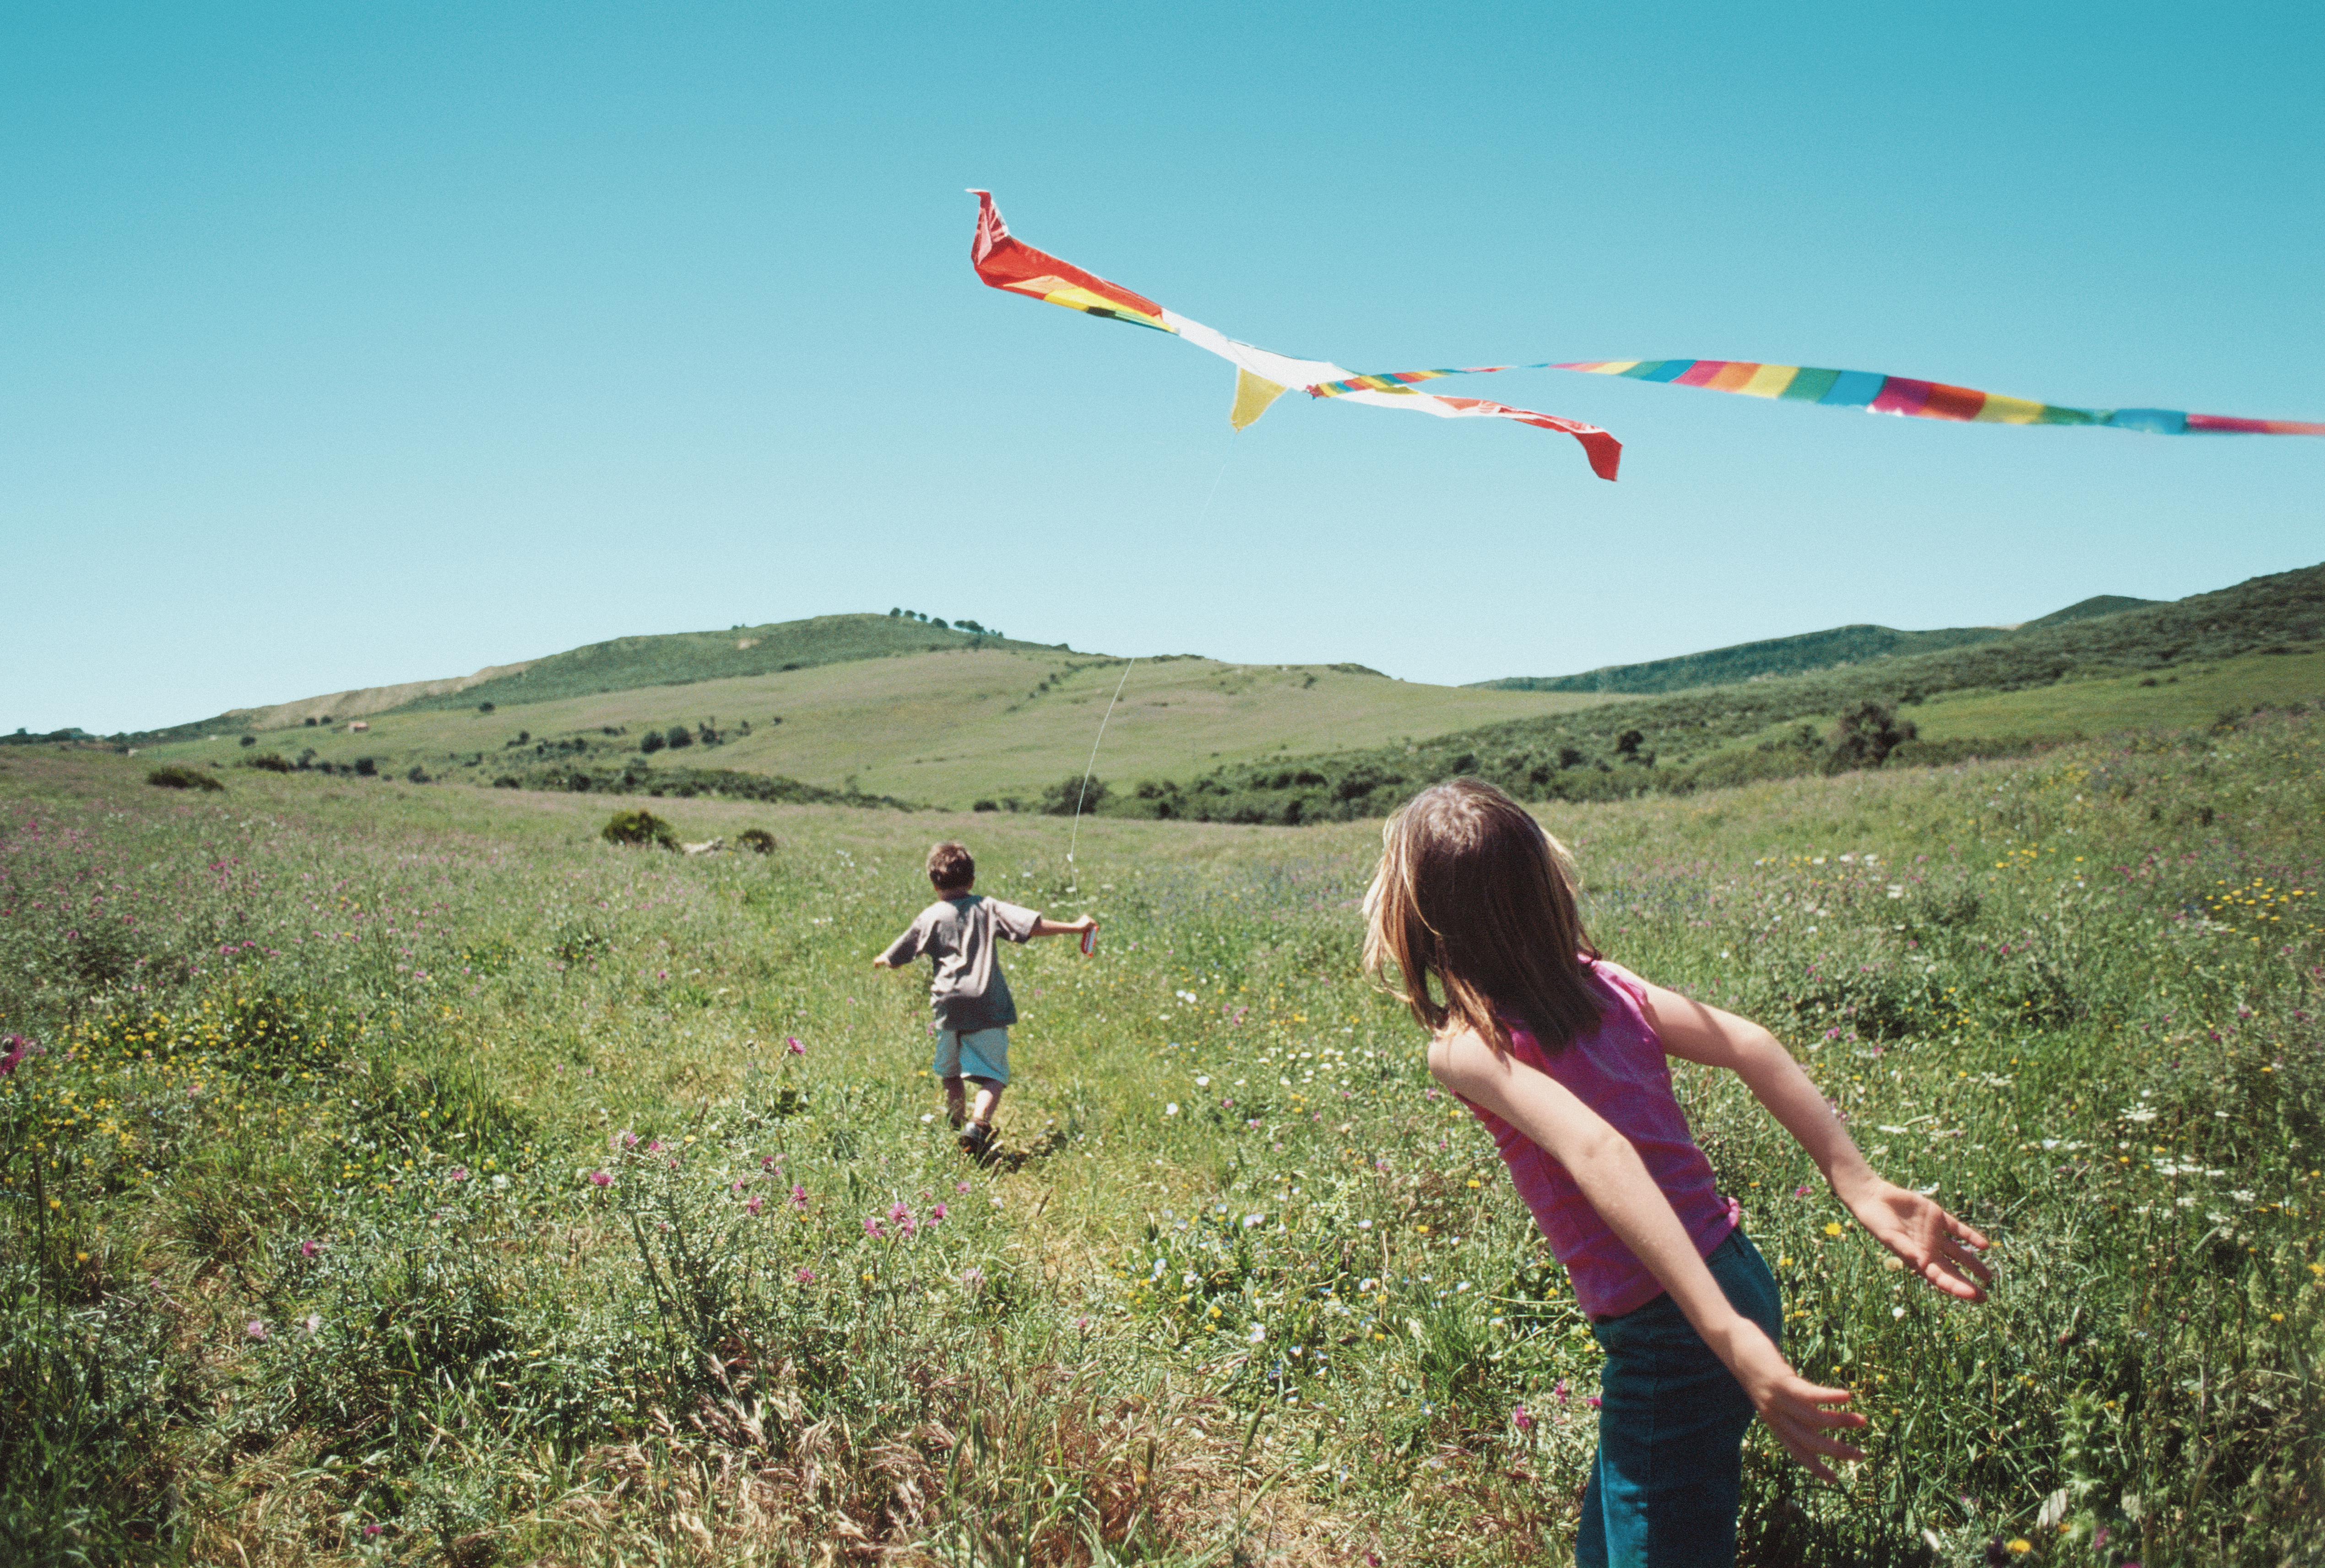 kids-playing-with-kite-gettyimages-522904060.jpg